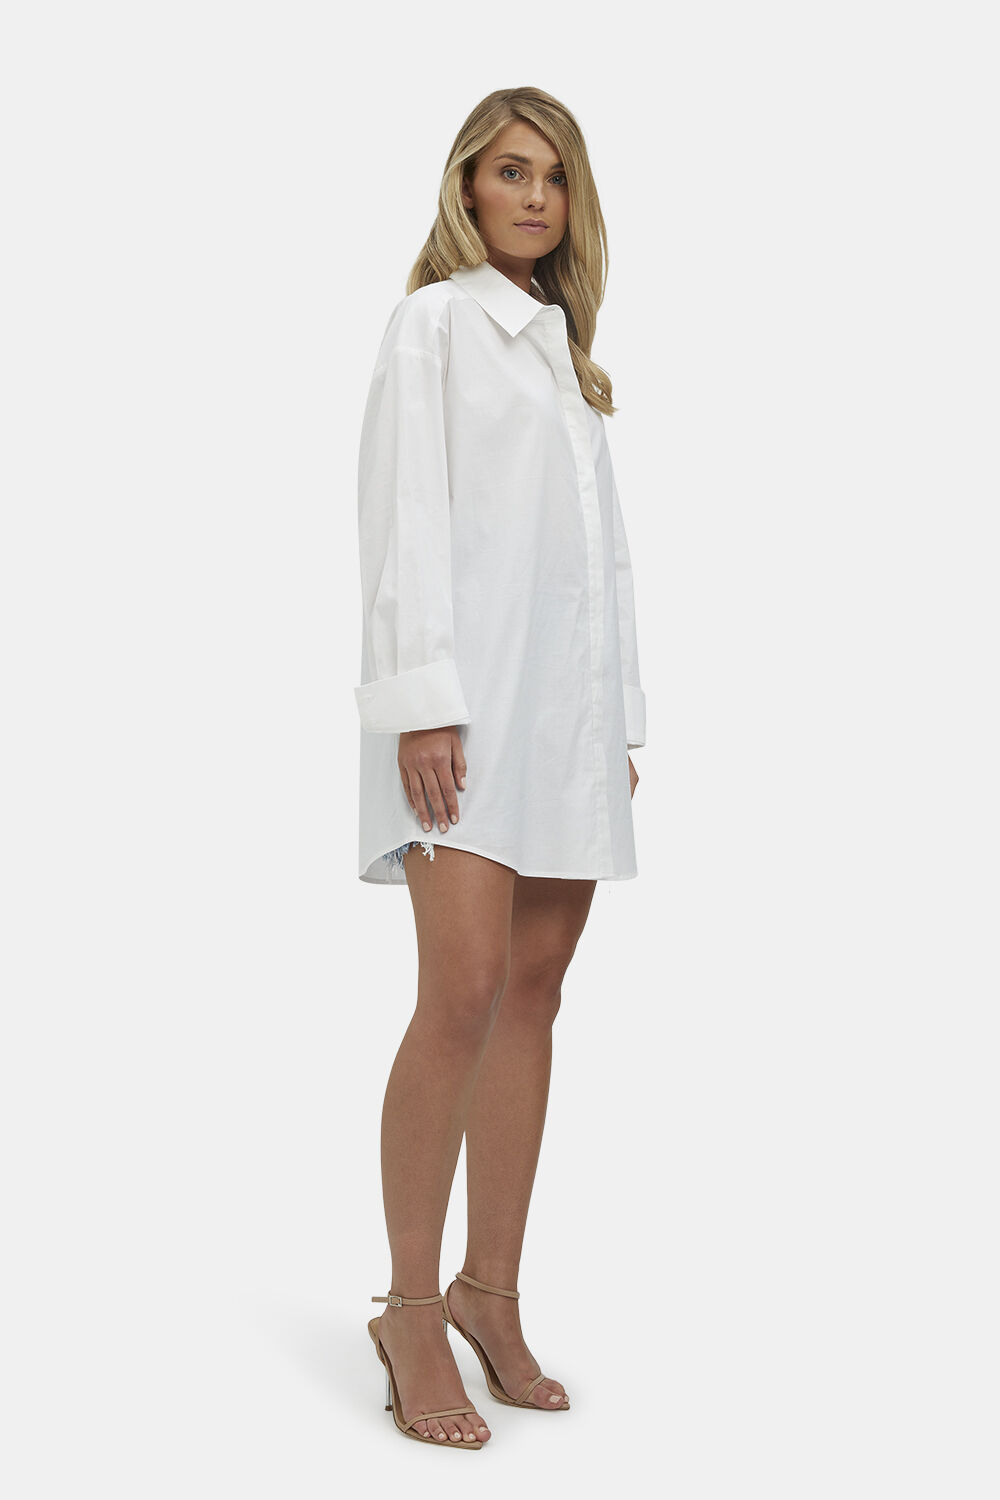 CLASSIC OVERSIZED SHIRT in colour BRIGHT WHITE